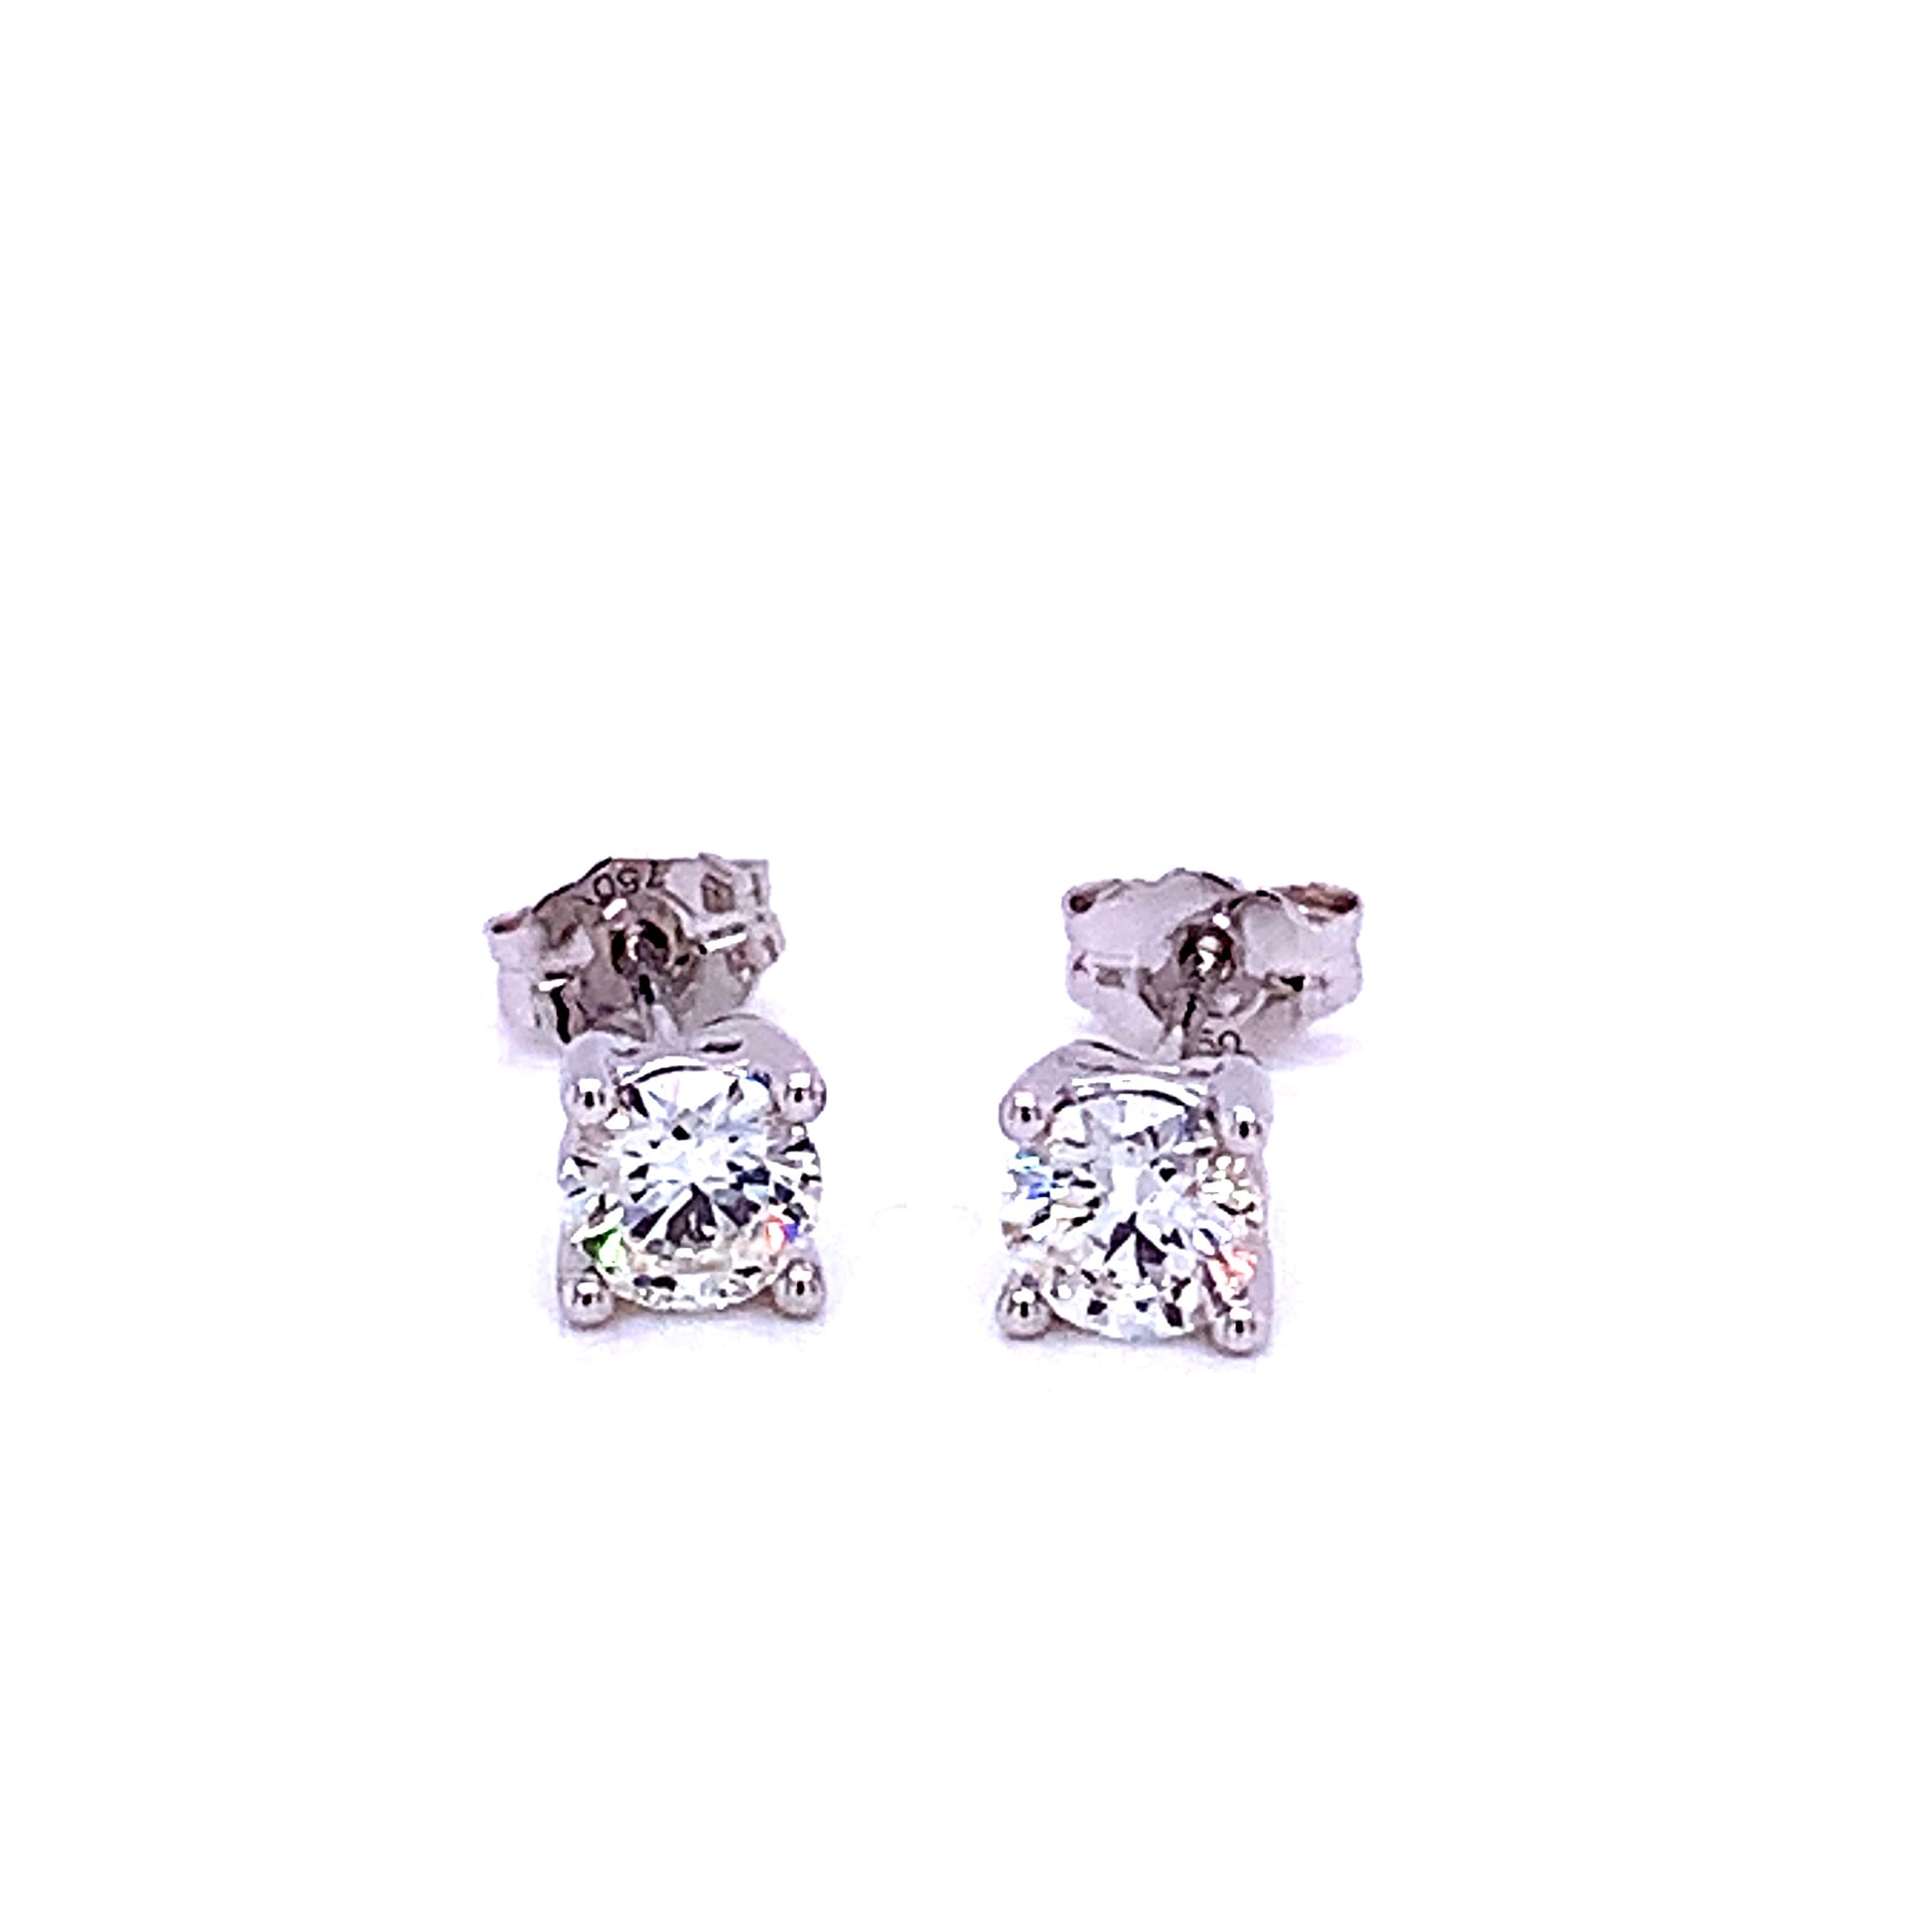 Round Brilliant Cut Diamond Solitaire Earrings - 0.70cts  Gardiner Brothers   